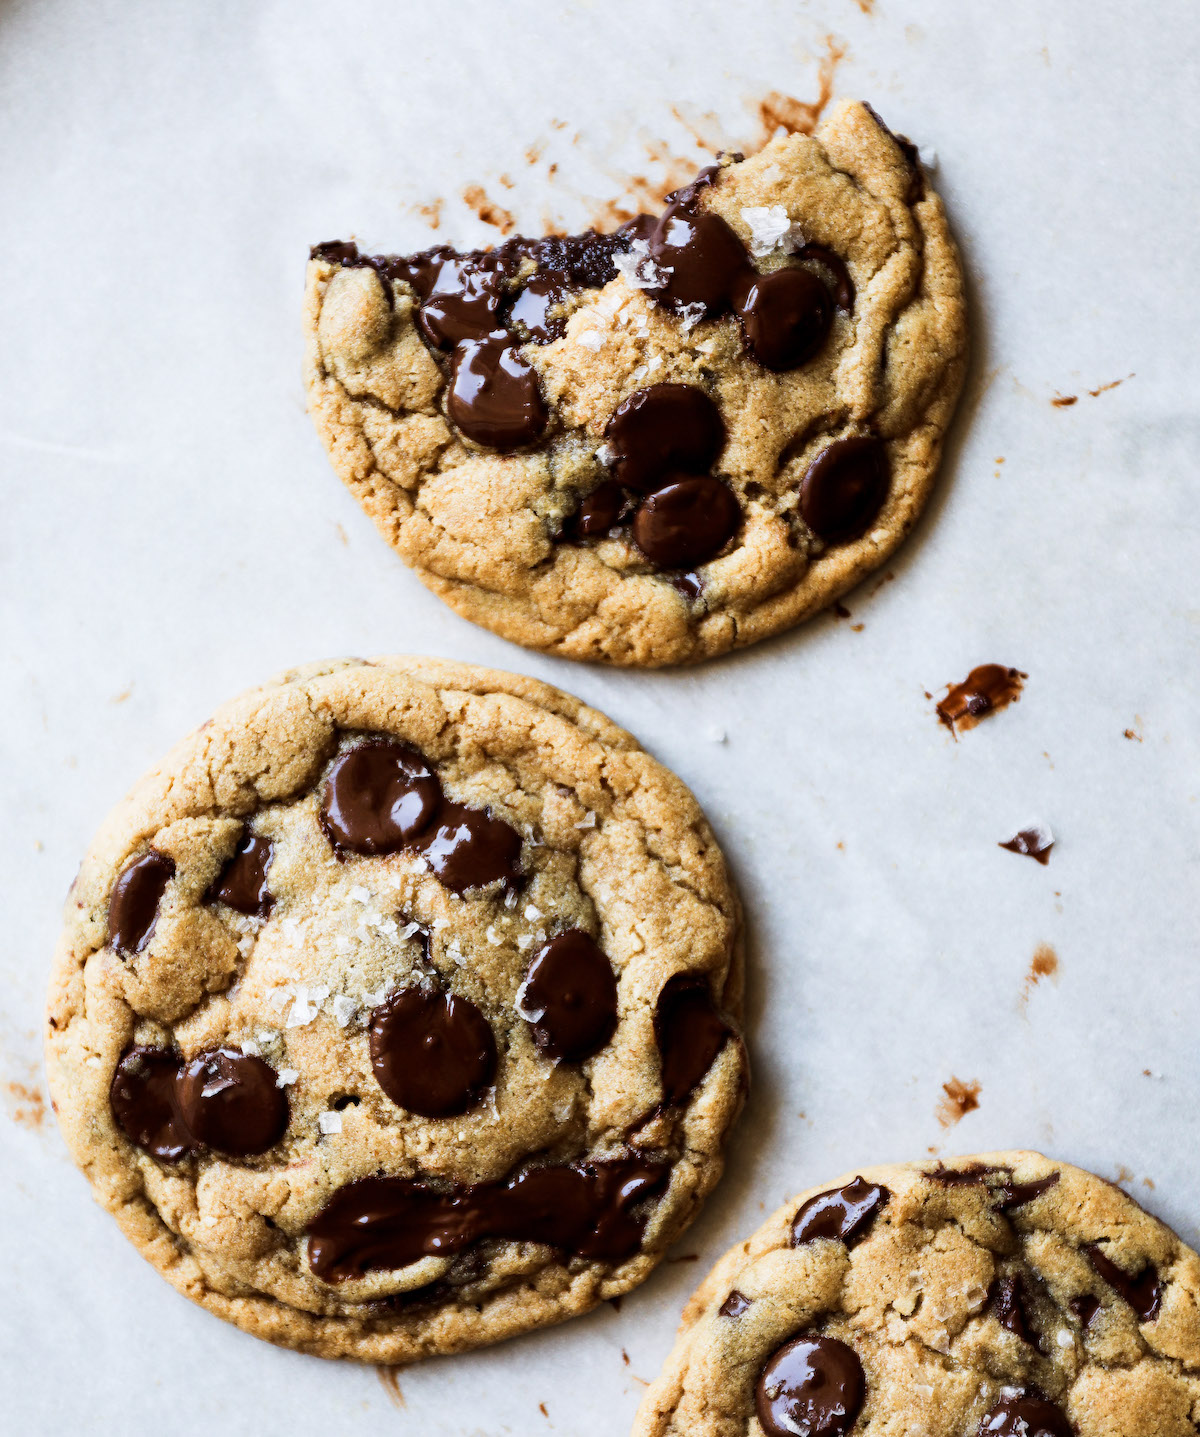 A nutella-stuffed chocolate chip cookie with a big bite out of it on a white surface.